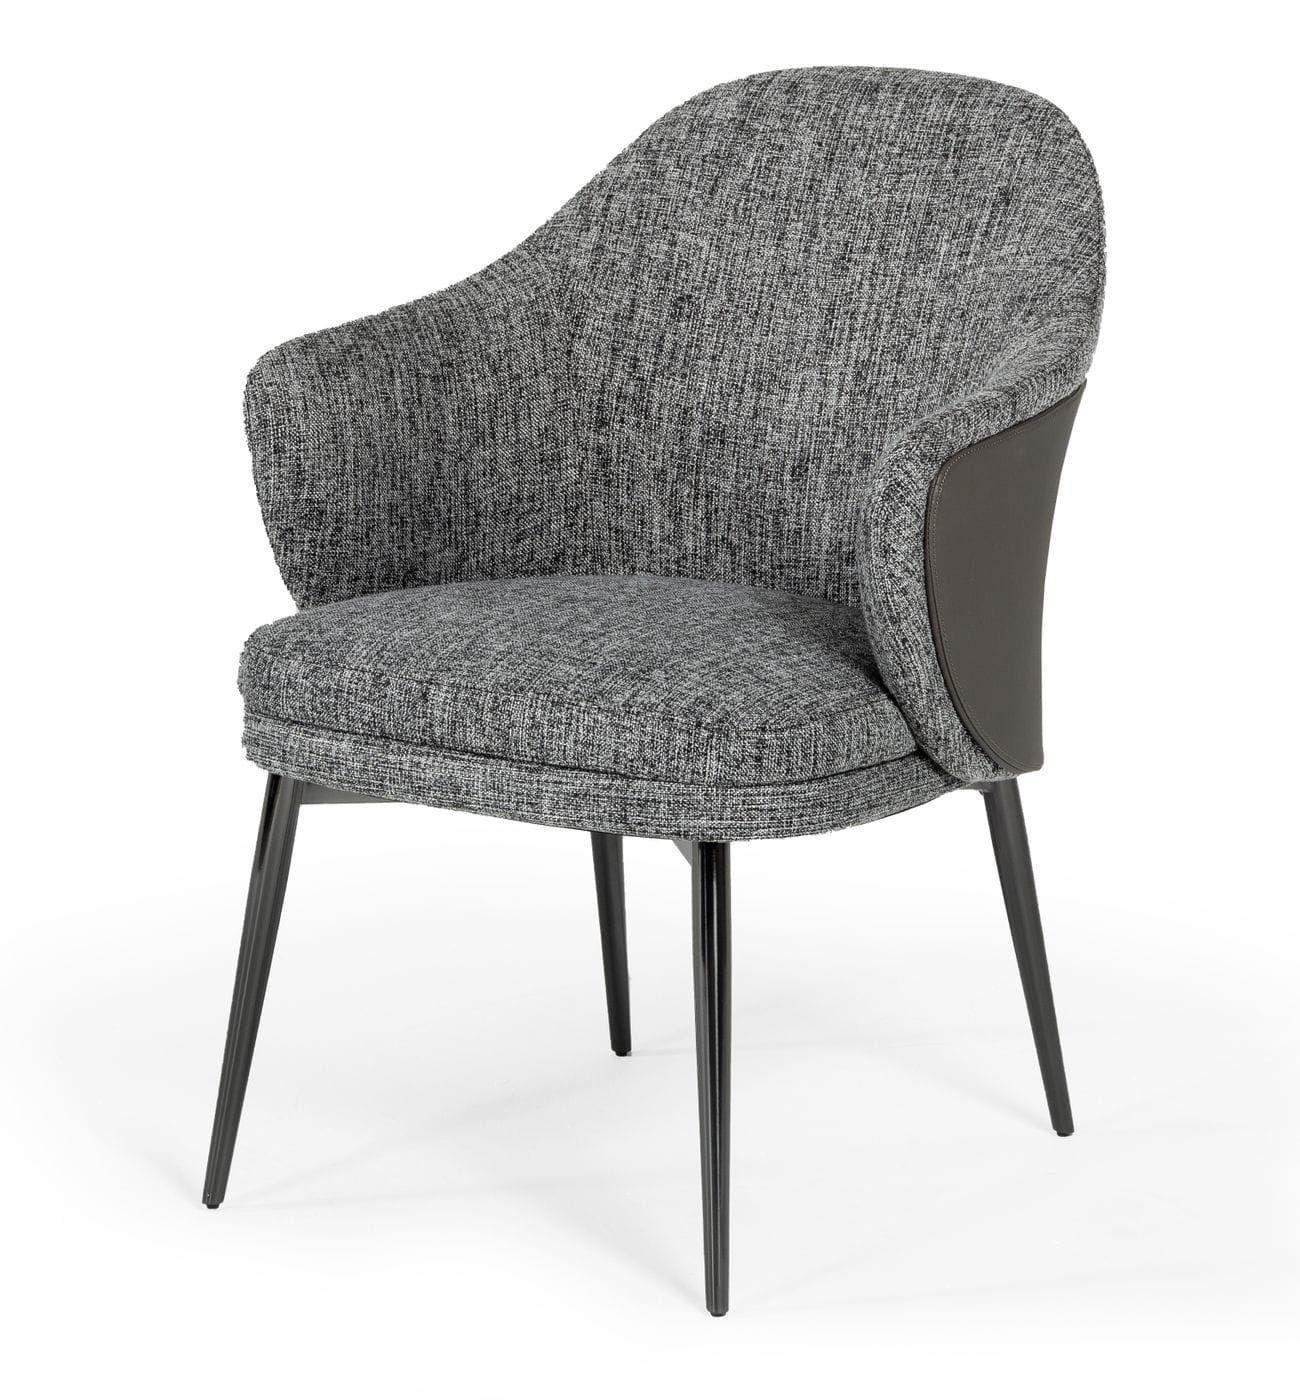 Contemporary, Modern Dining Chair Set Cora VGCSCH-19005-GRY-DC-2pcs in Walnut, Gray Fabric